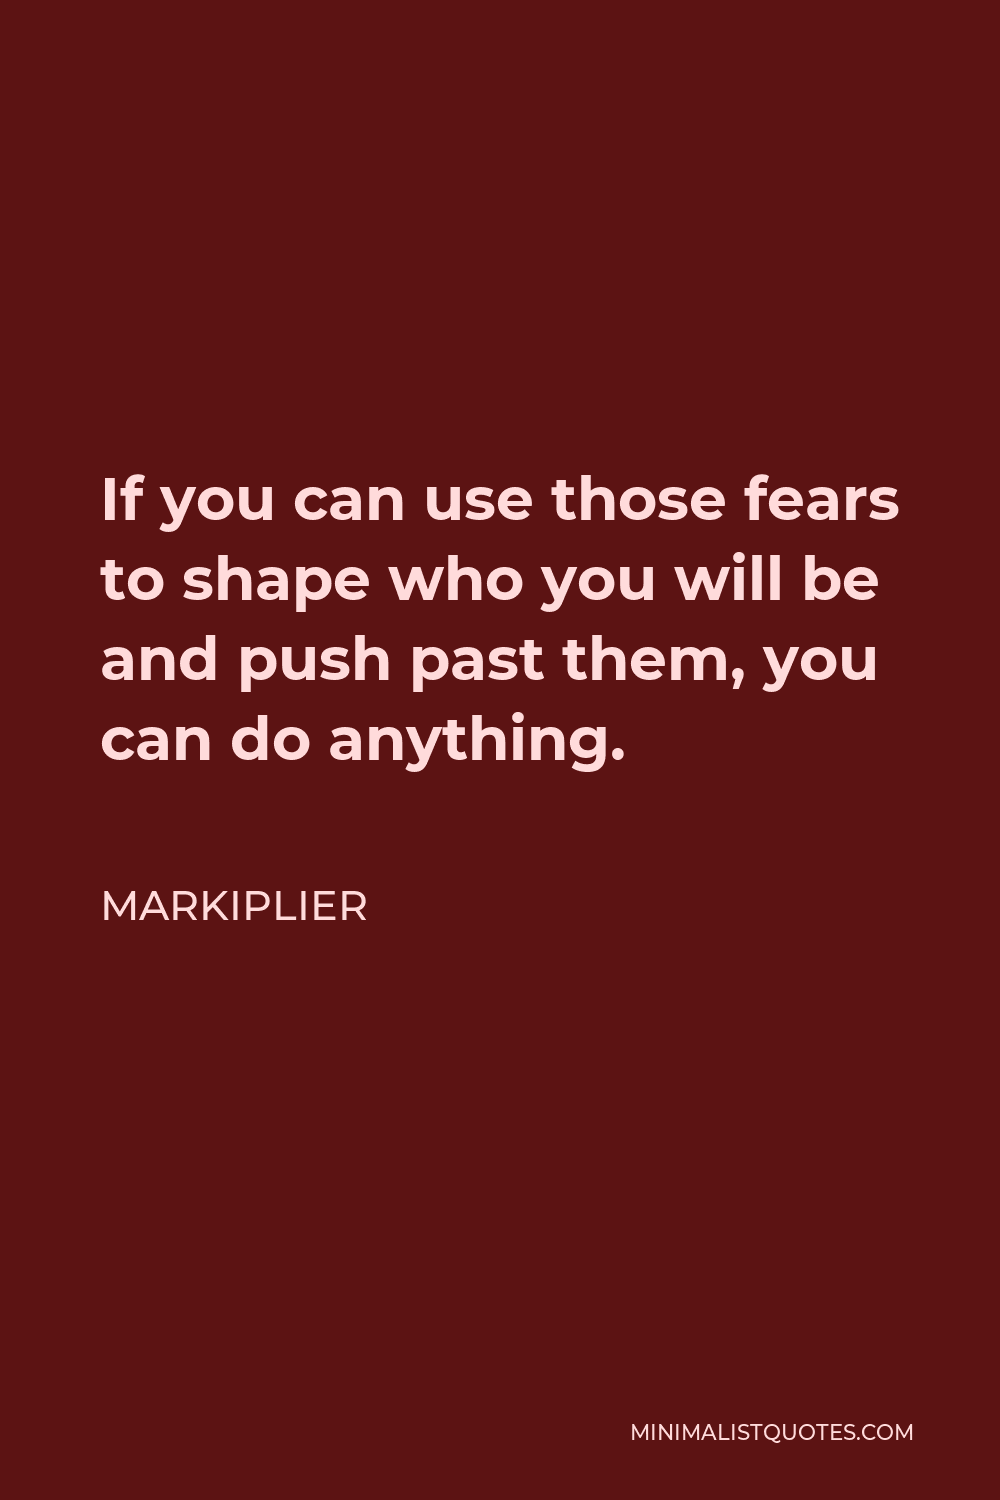 Markiplier Quote - If you can use those fears to shape who you will be and push past them, you can do anything.